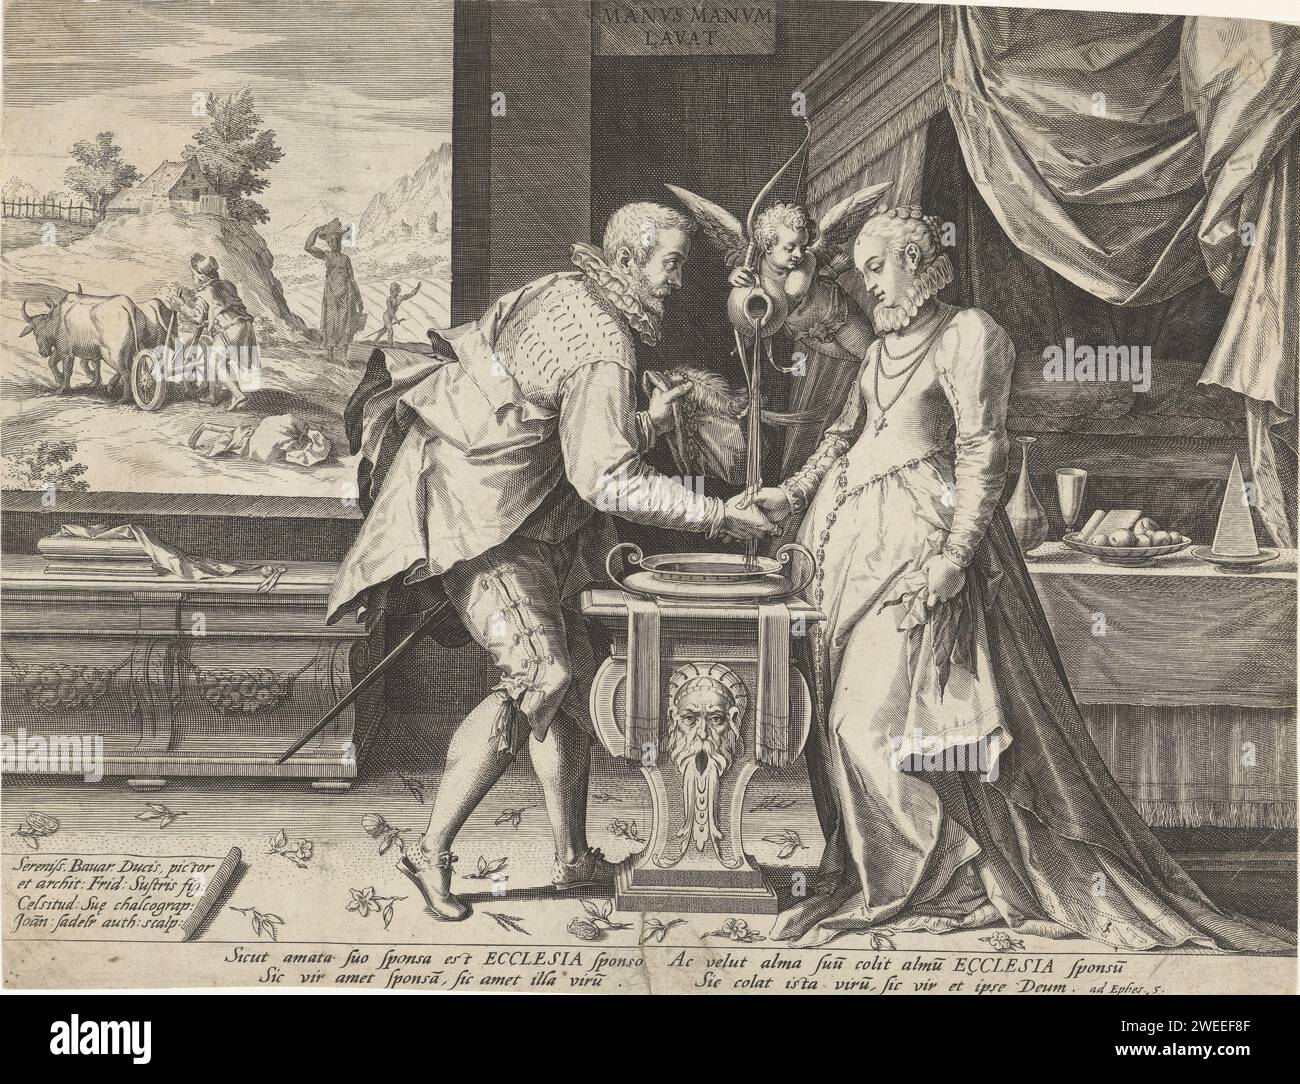 Allegory at marriage, Johann Sadeler (I), After Frederik Sustris, 1588 - 1595 print Cupido pours water over the hands of a man and woman who are opposite each other. At the rear right in the departure a four -poster bed. On the left through the window you can see a plowing farmer. The print has a Latin caption with a Bible quotation about marriage (Eph. 5). München paper engraving (personifications and symbolic representations of) Love; 'Amore (secondo Seneca)' (Ripa). 'Benevolenza et Unione matrimoniale', 'Concordia maritale' (Ripa). shaking hands, 'dextrarum junctio'. bed with tester. plough Stock Photo